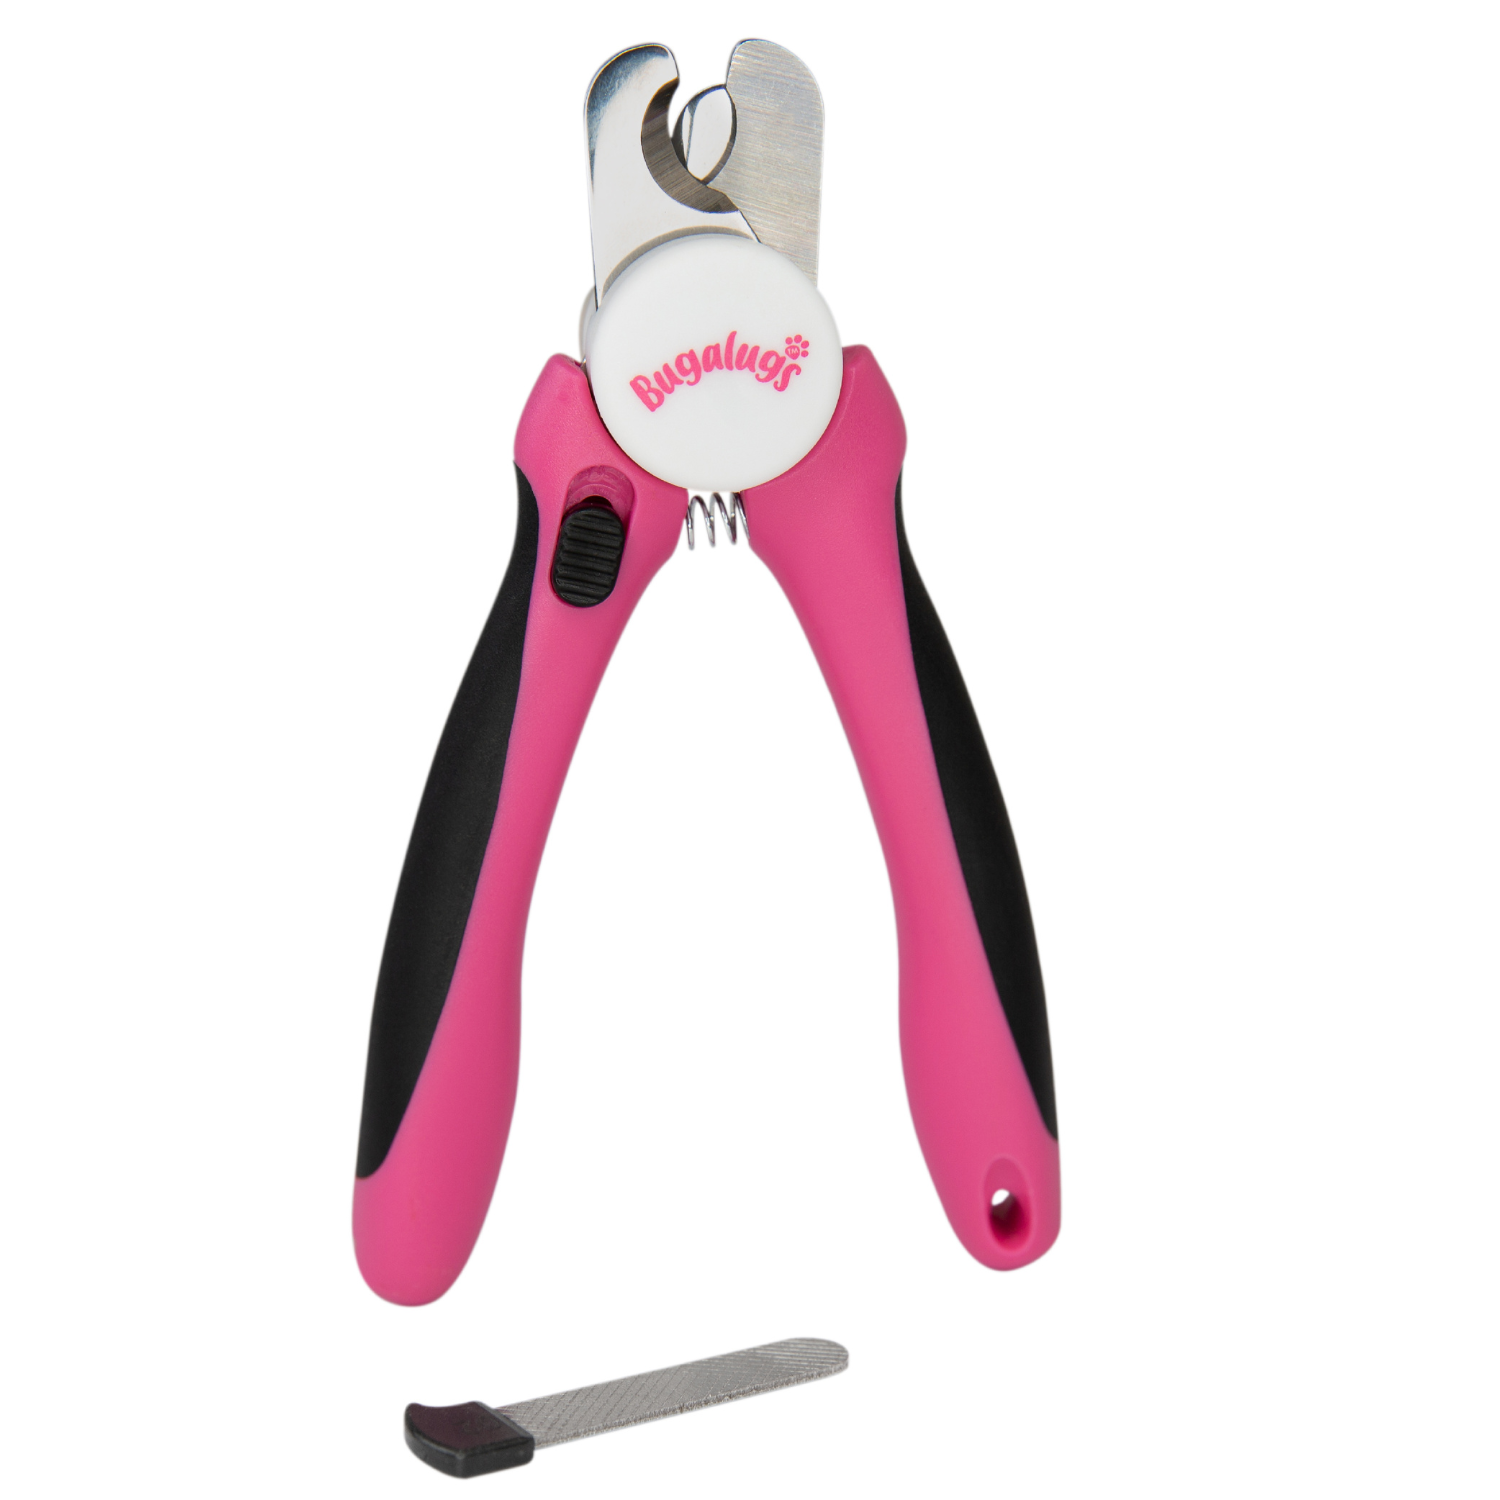 Bugalugs Small to Medium Pet Nail Clippers in Pink and Black